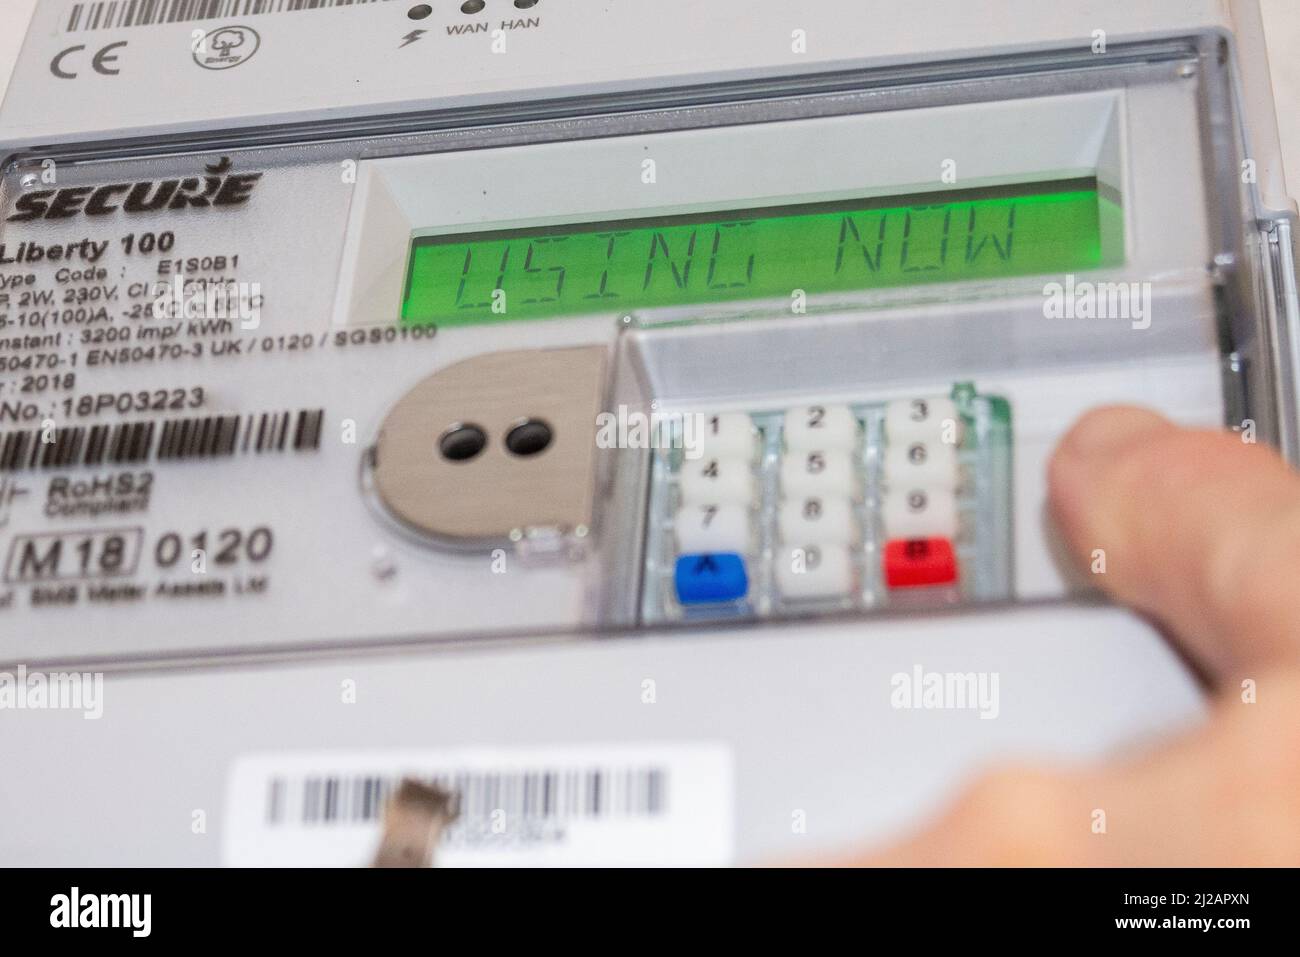 Southend on Sea, Essex, UK. 31st Mar, 2022. People in the UK are being advised to check their gas and electricity meter readings and upload them to their supplier’s websites if applicable to avoid being overcharged when the price cap increases tomorrow, the 1st April. Electricity meter being checked. Using now message Stock Photo